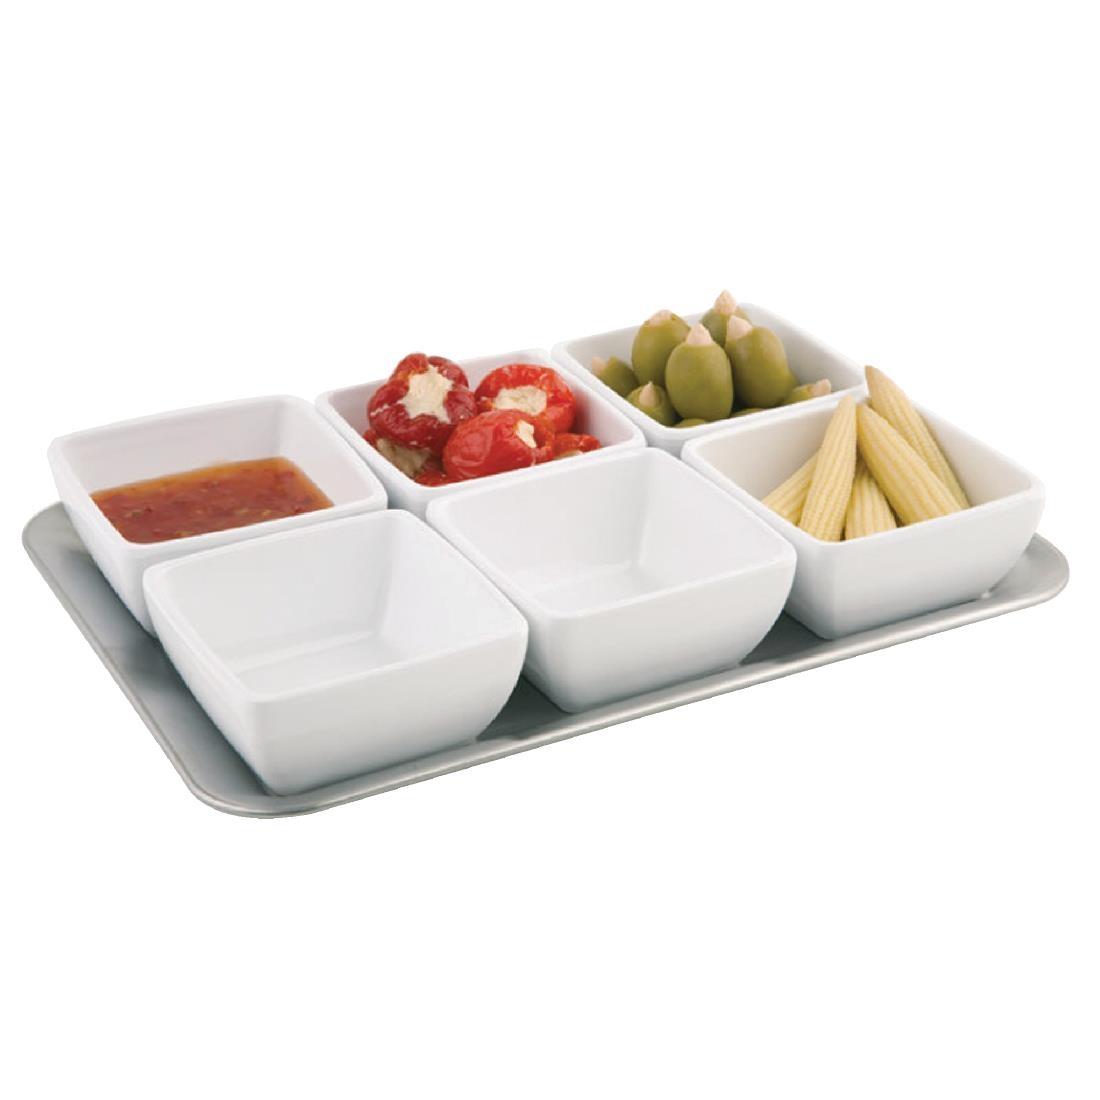 APS Pure Stainless Steel Tray - GF162  - 2